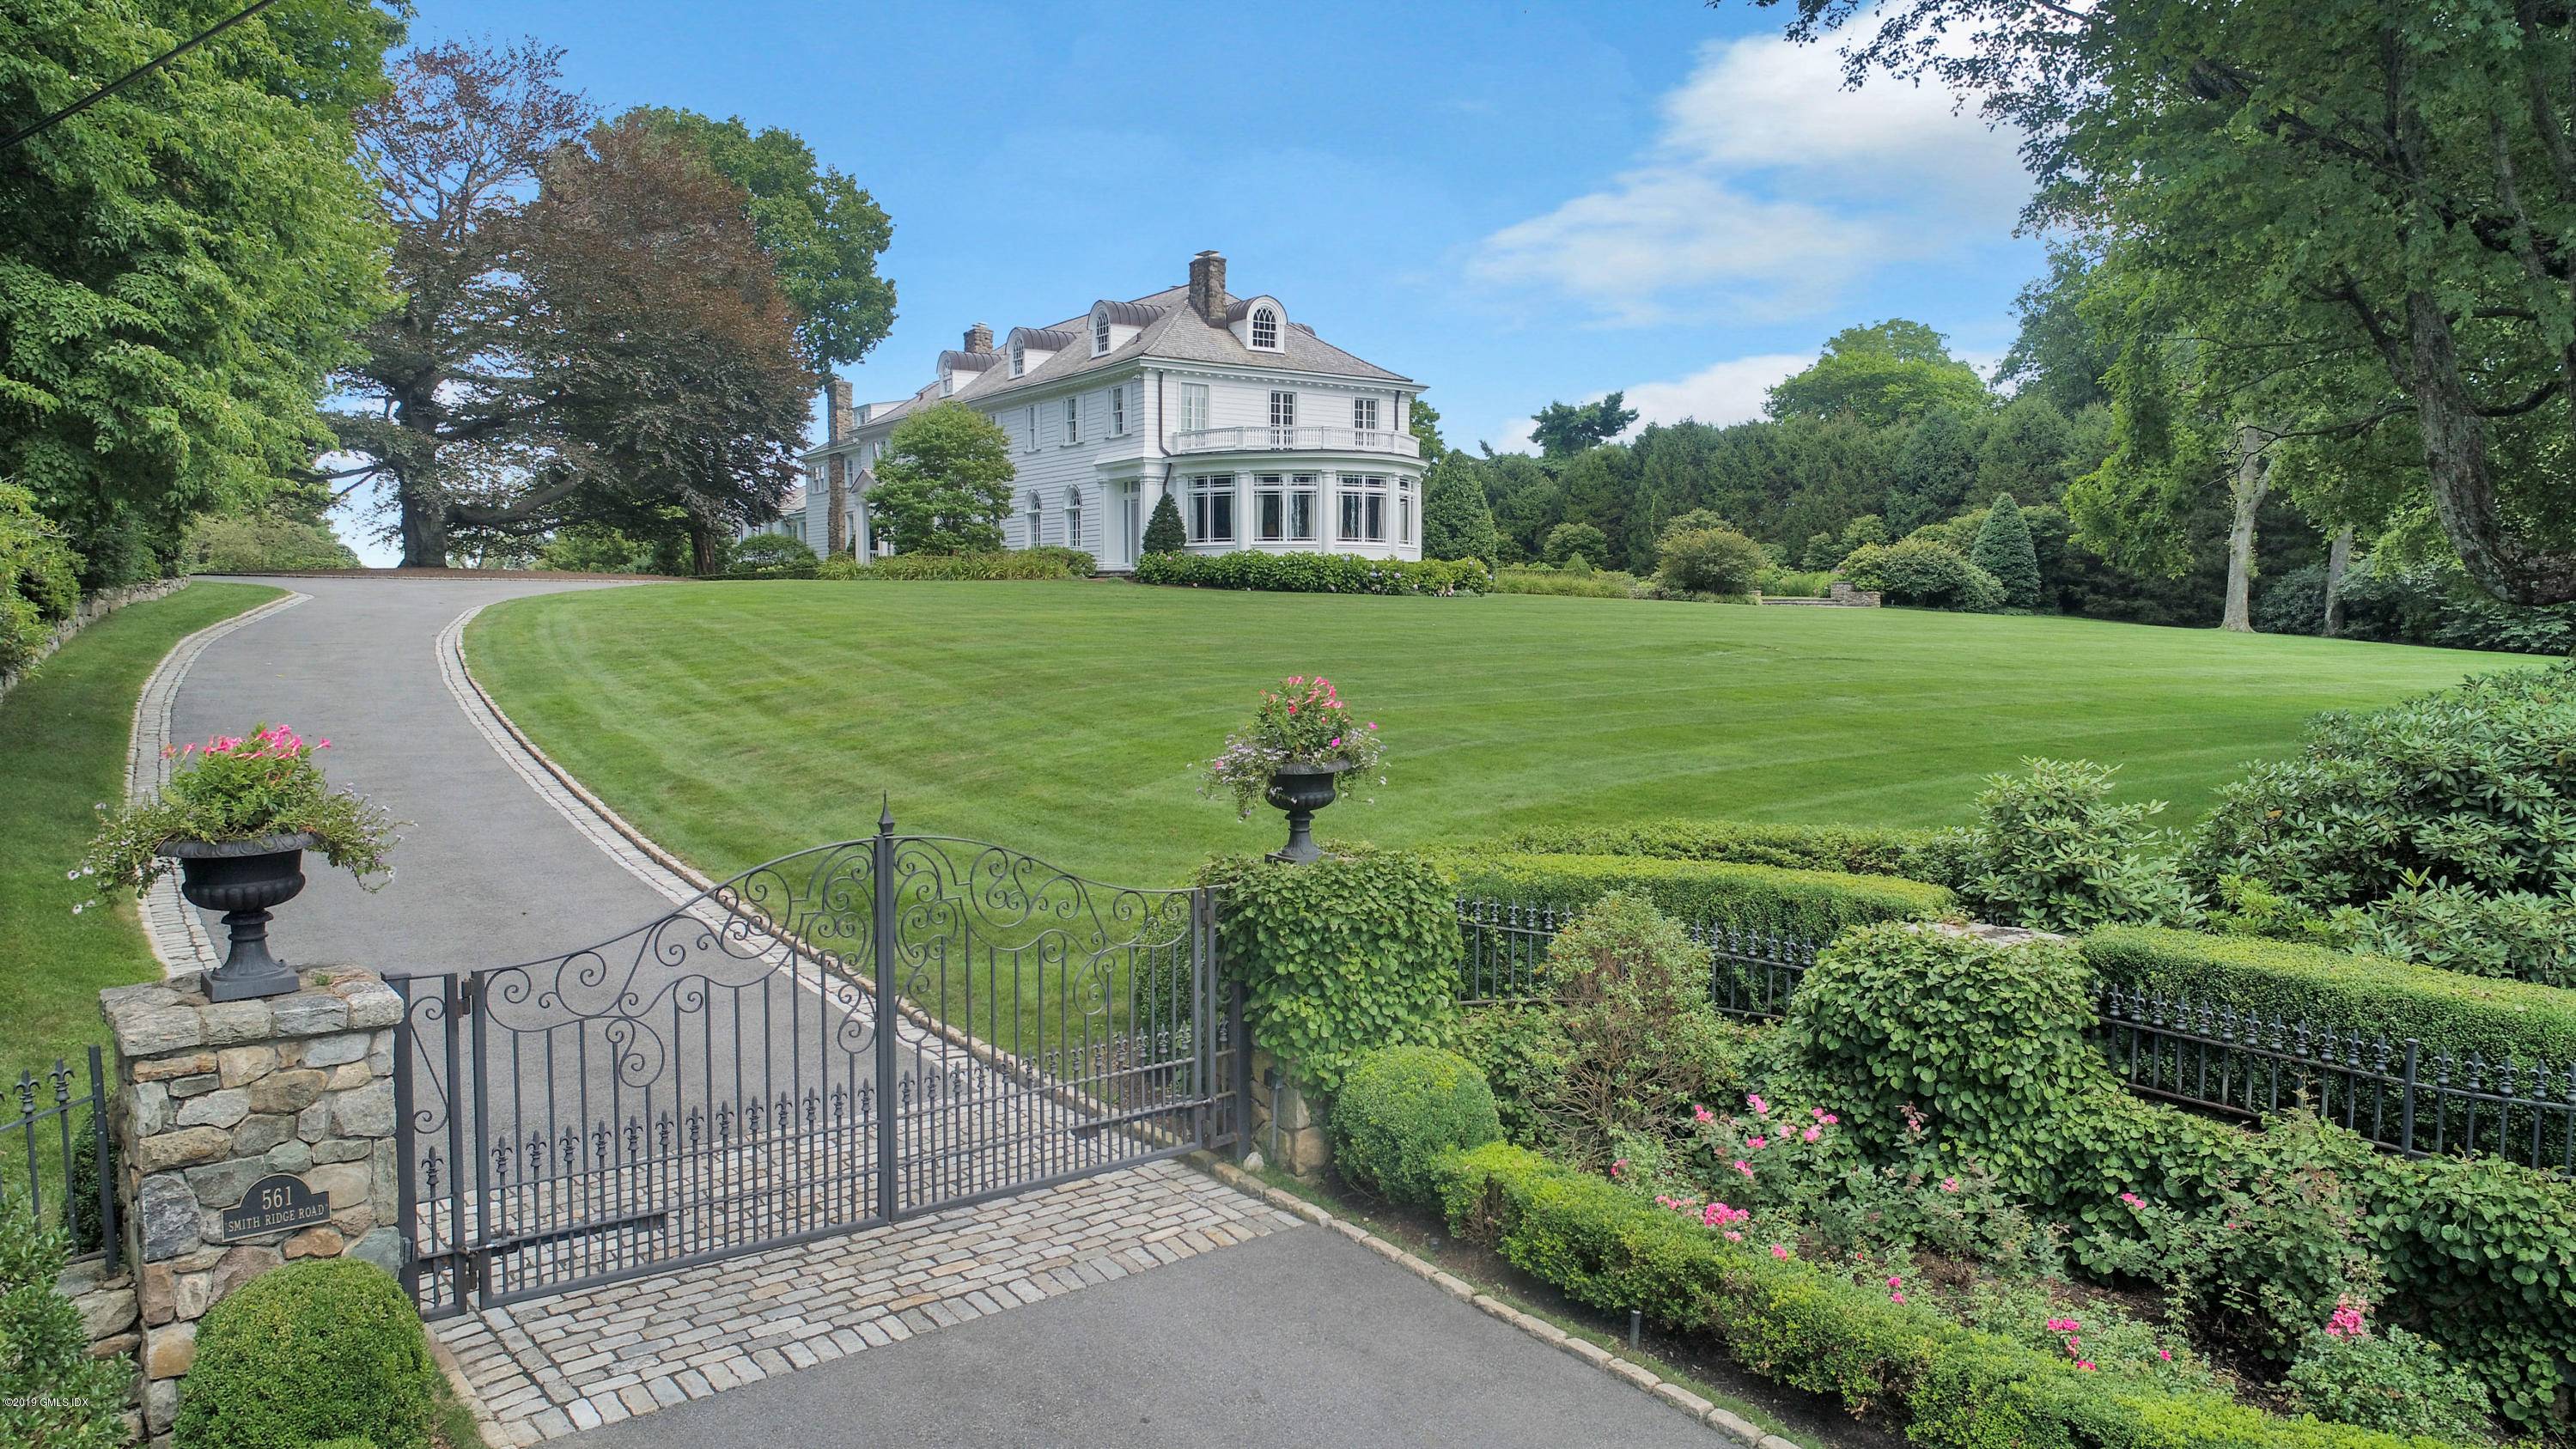 Iconic Stanford White country estate on a four acre setting perched on the highest elevation in New Canaan.